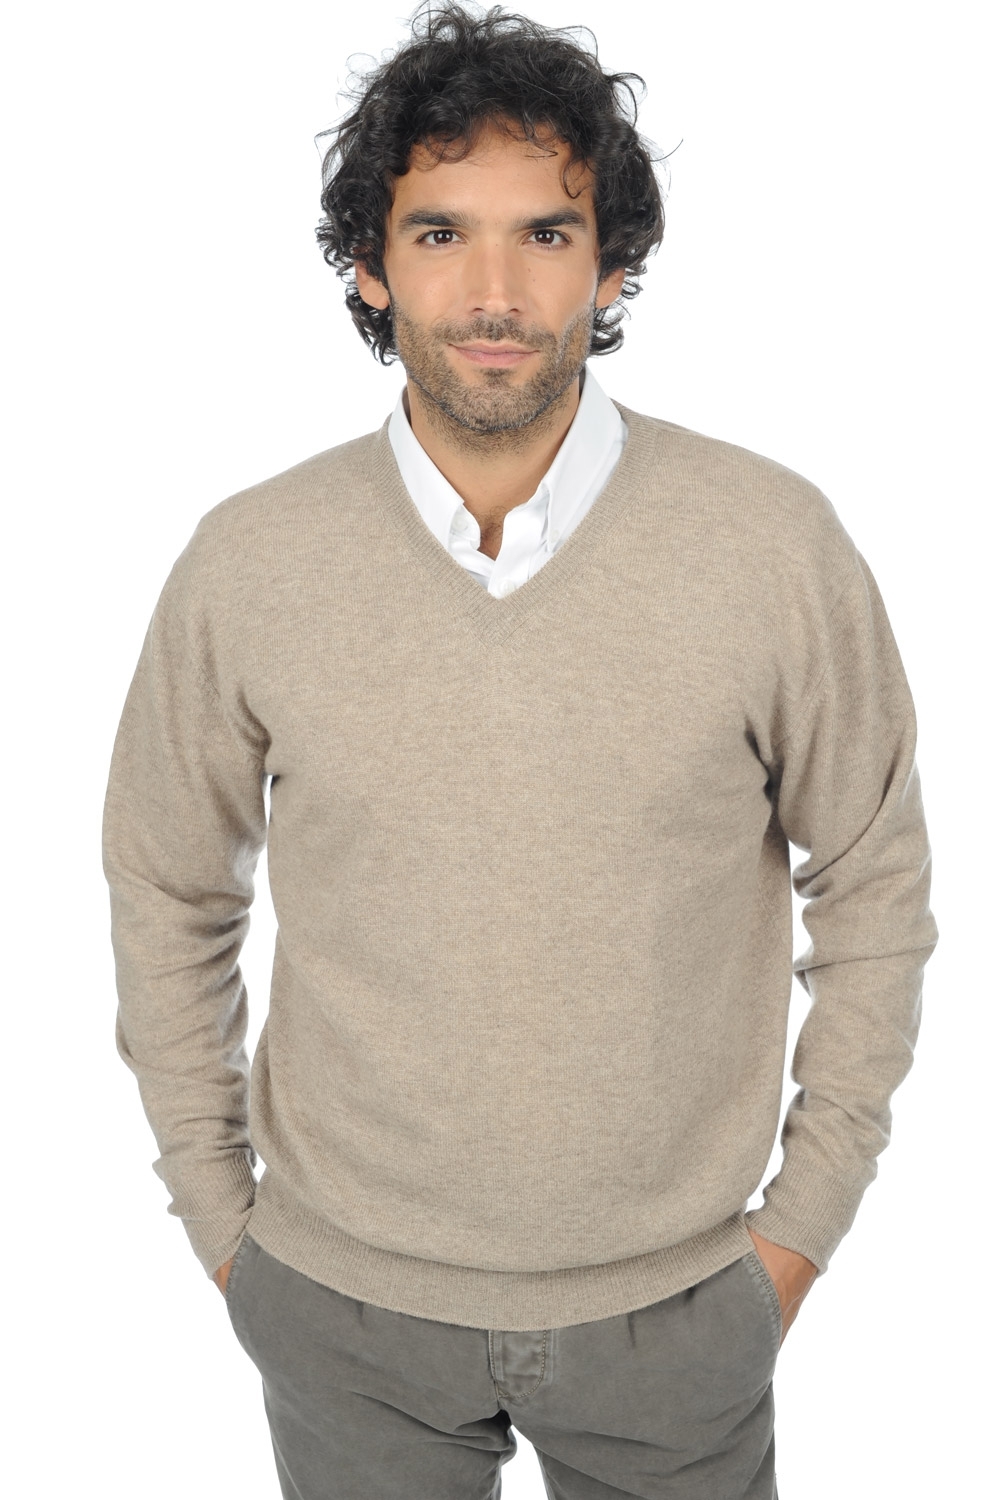 Cachemire pull homme hippolyte natural brown 2xl